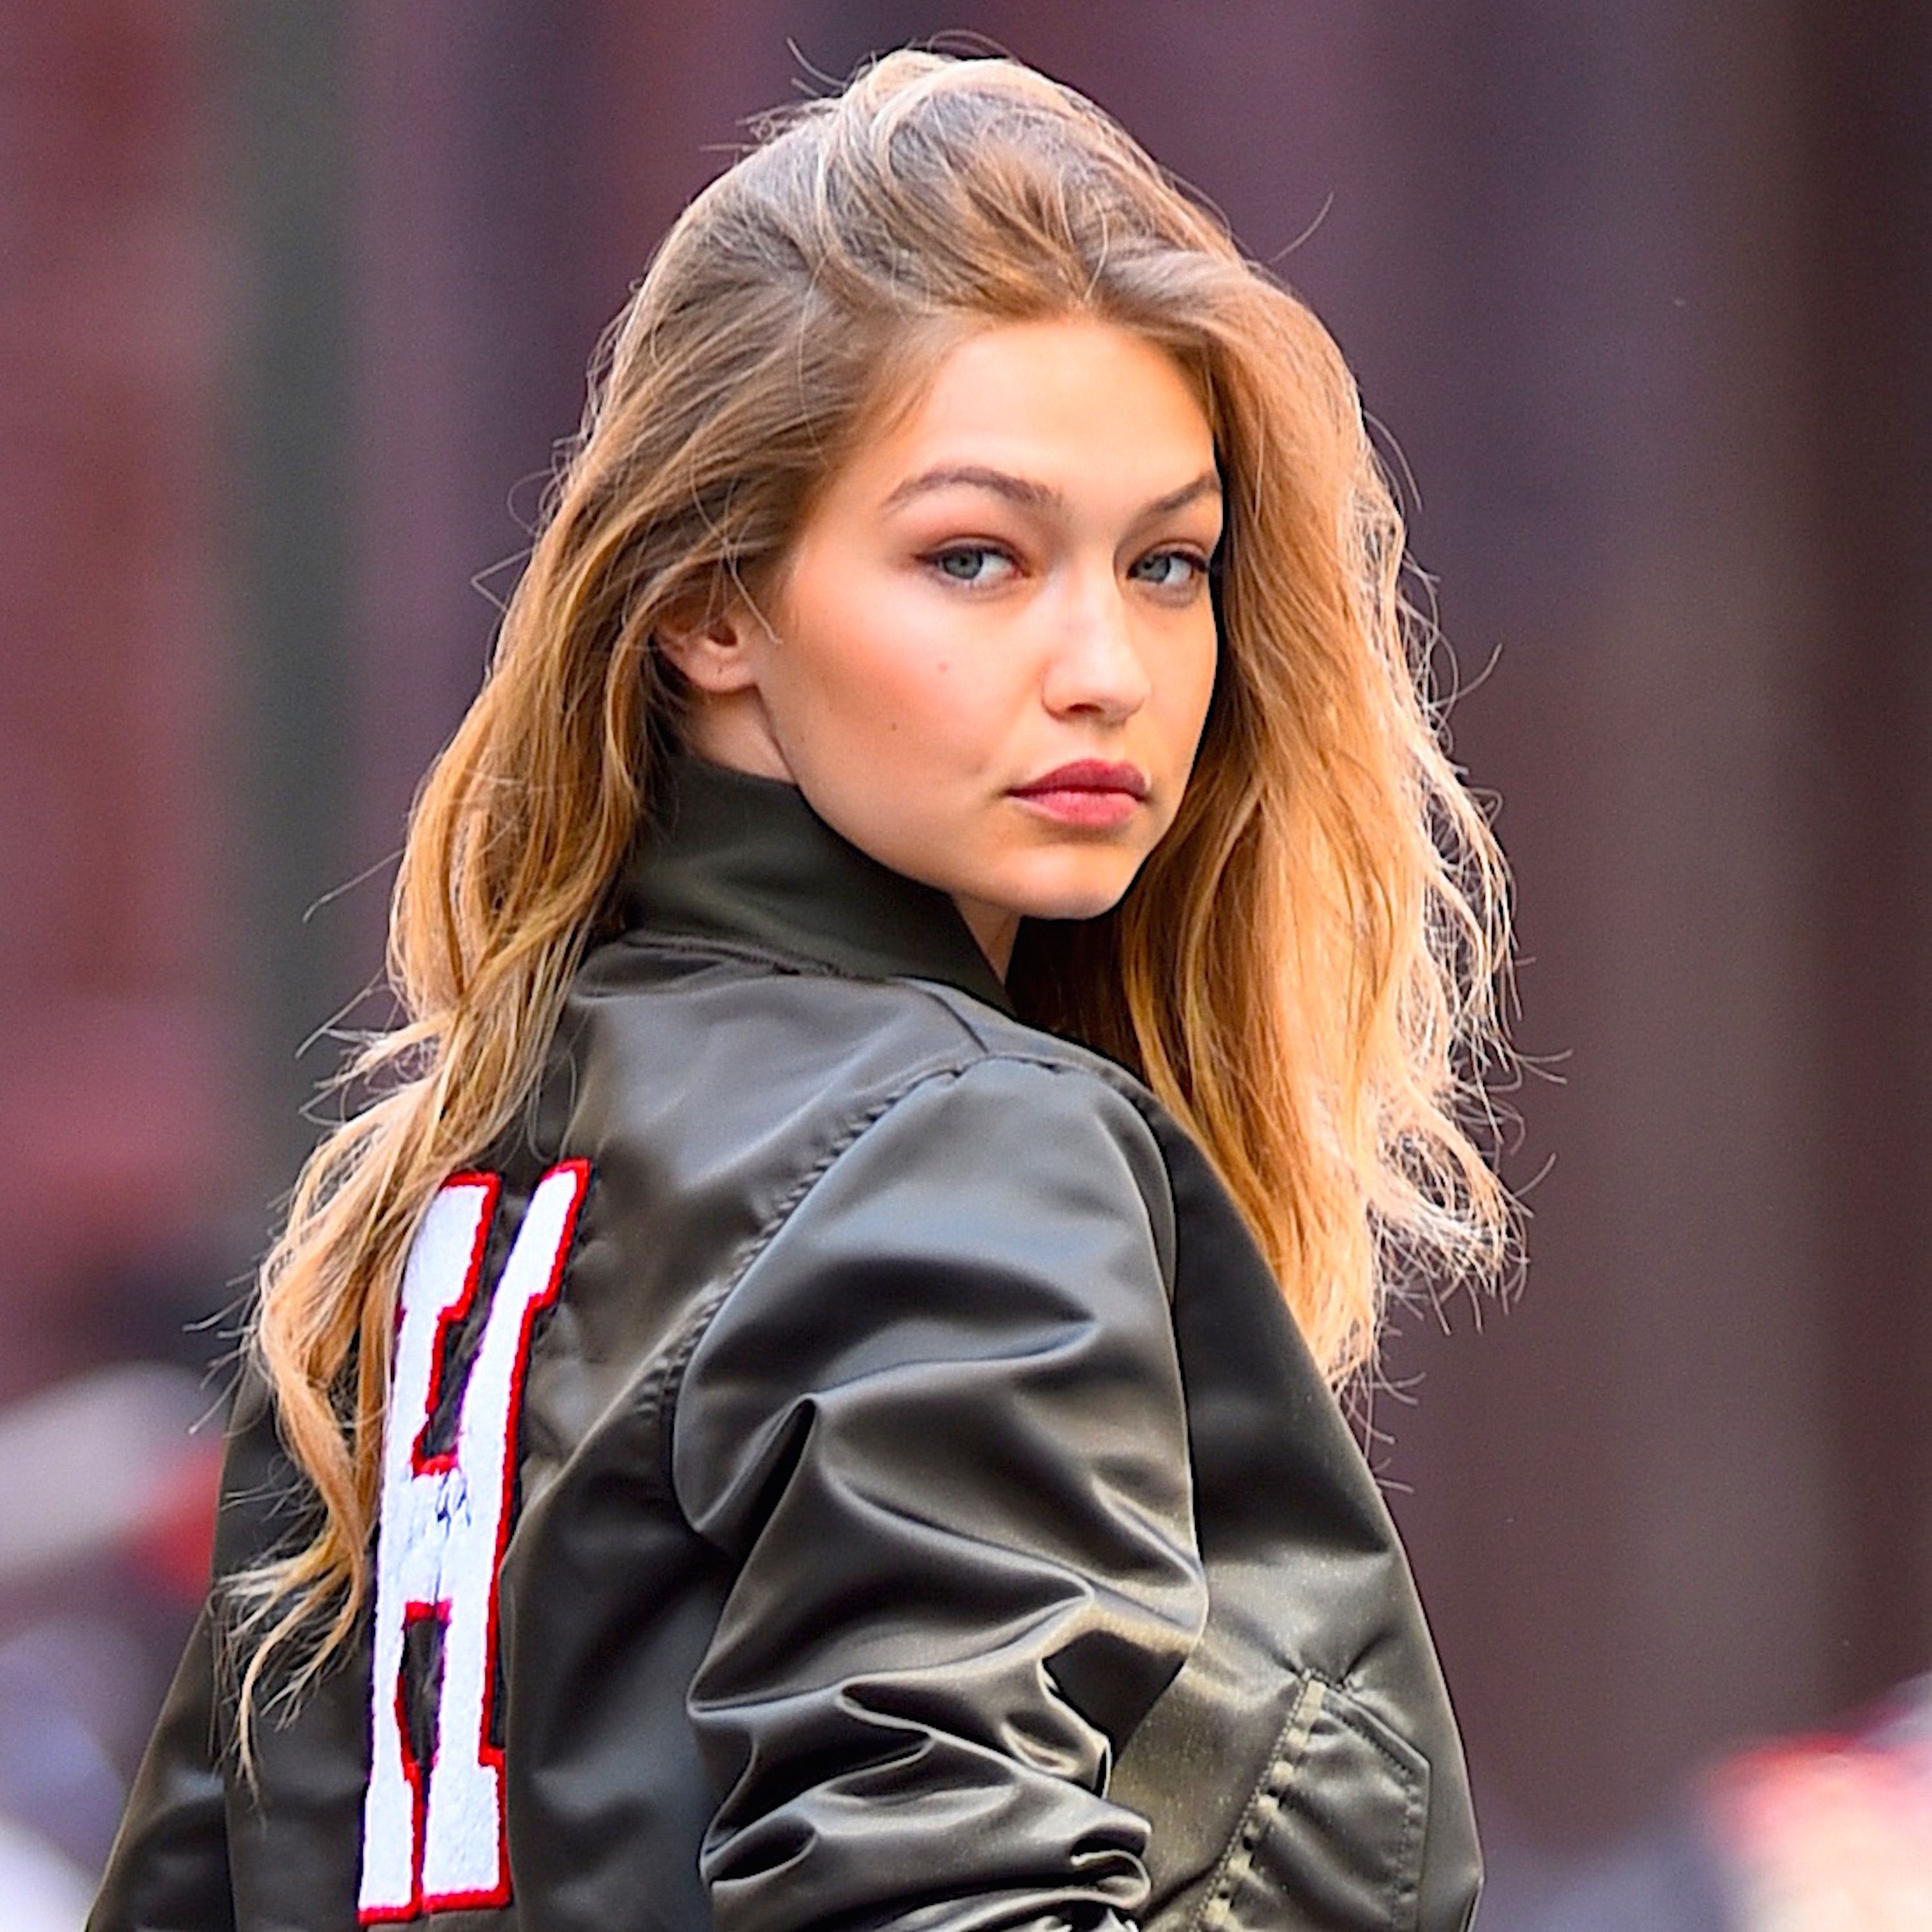 Gigi Hadid Biography, Siblings, Age, Life, Education, Career, And Much More